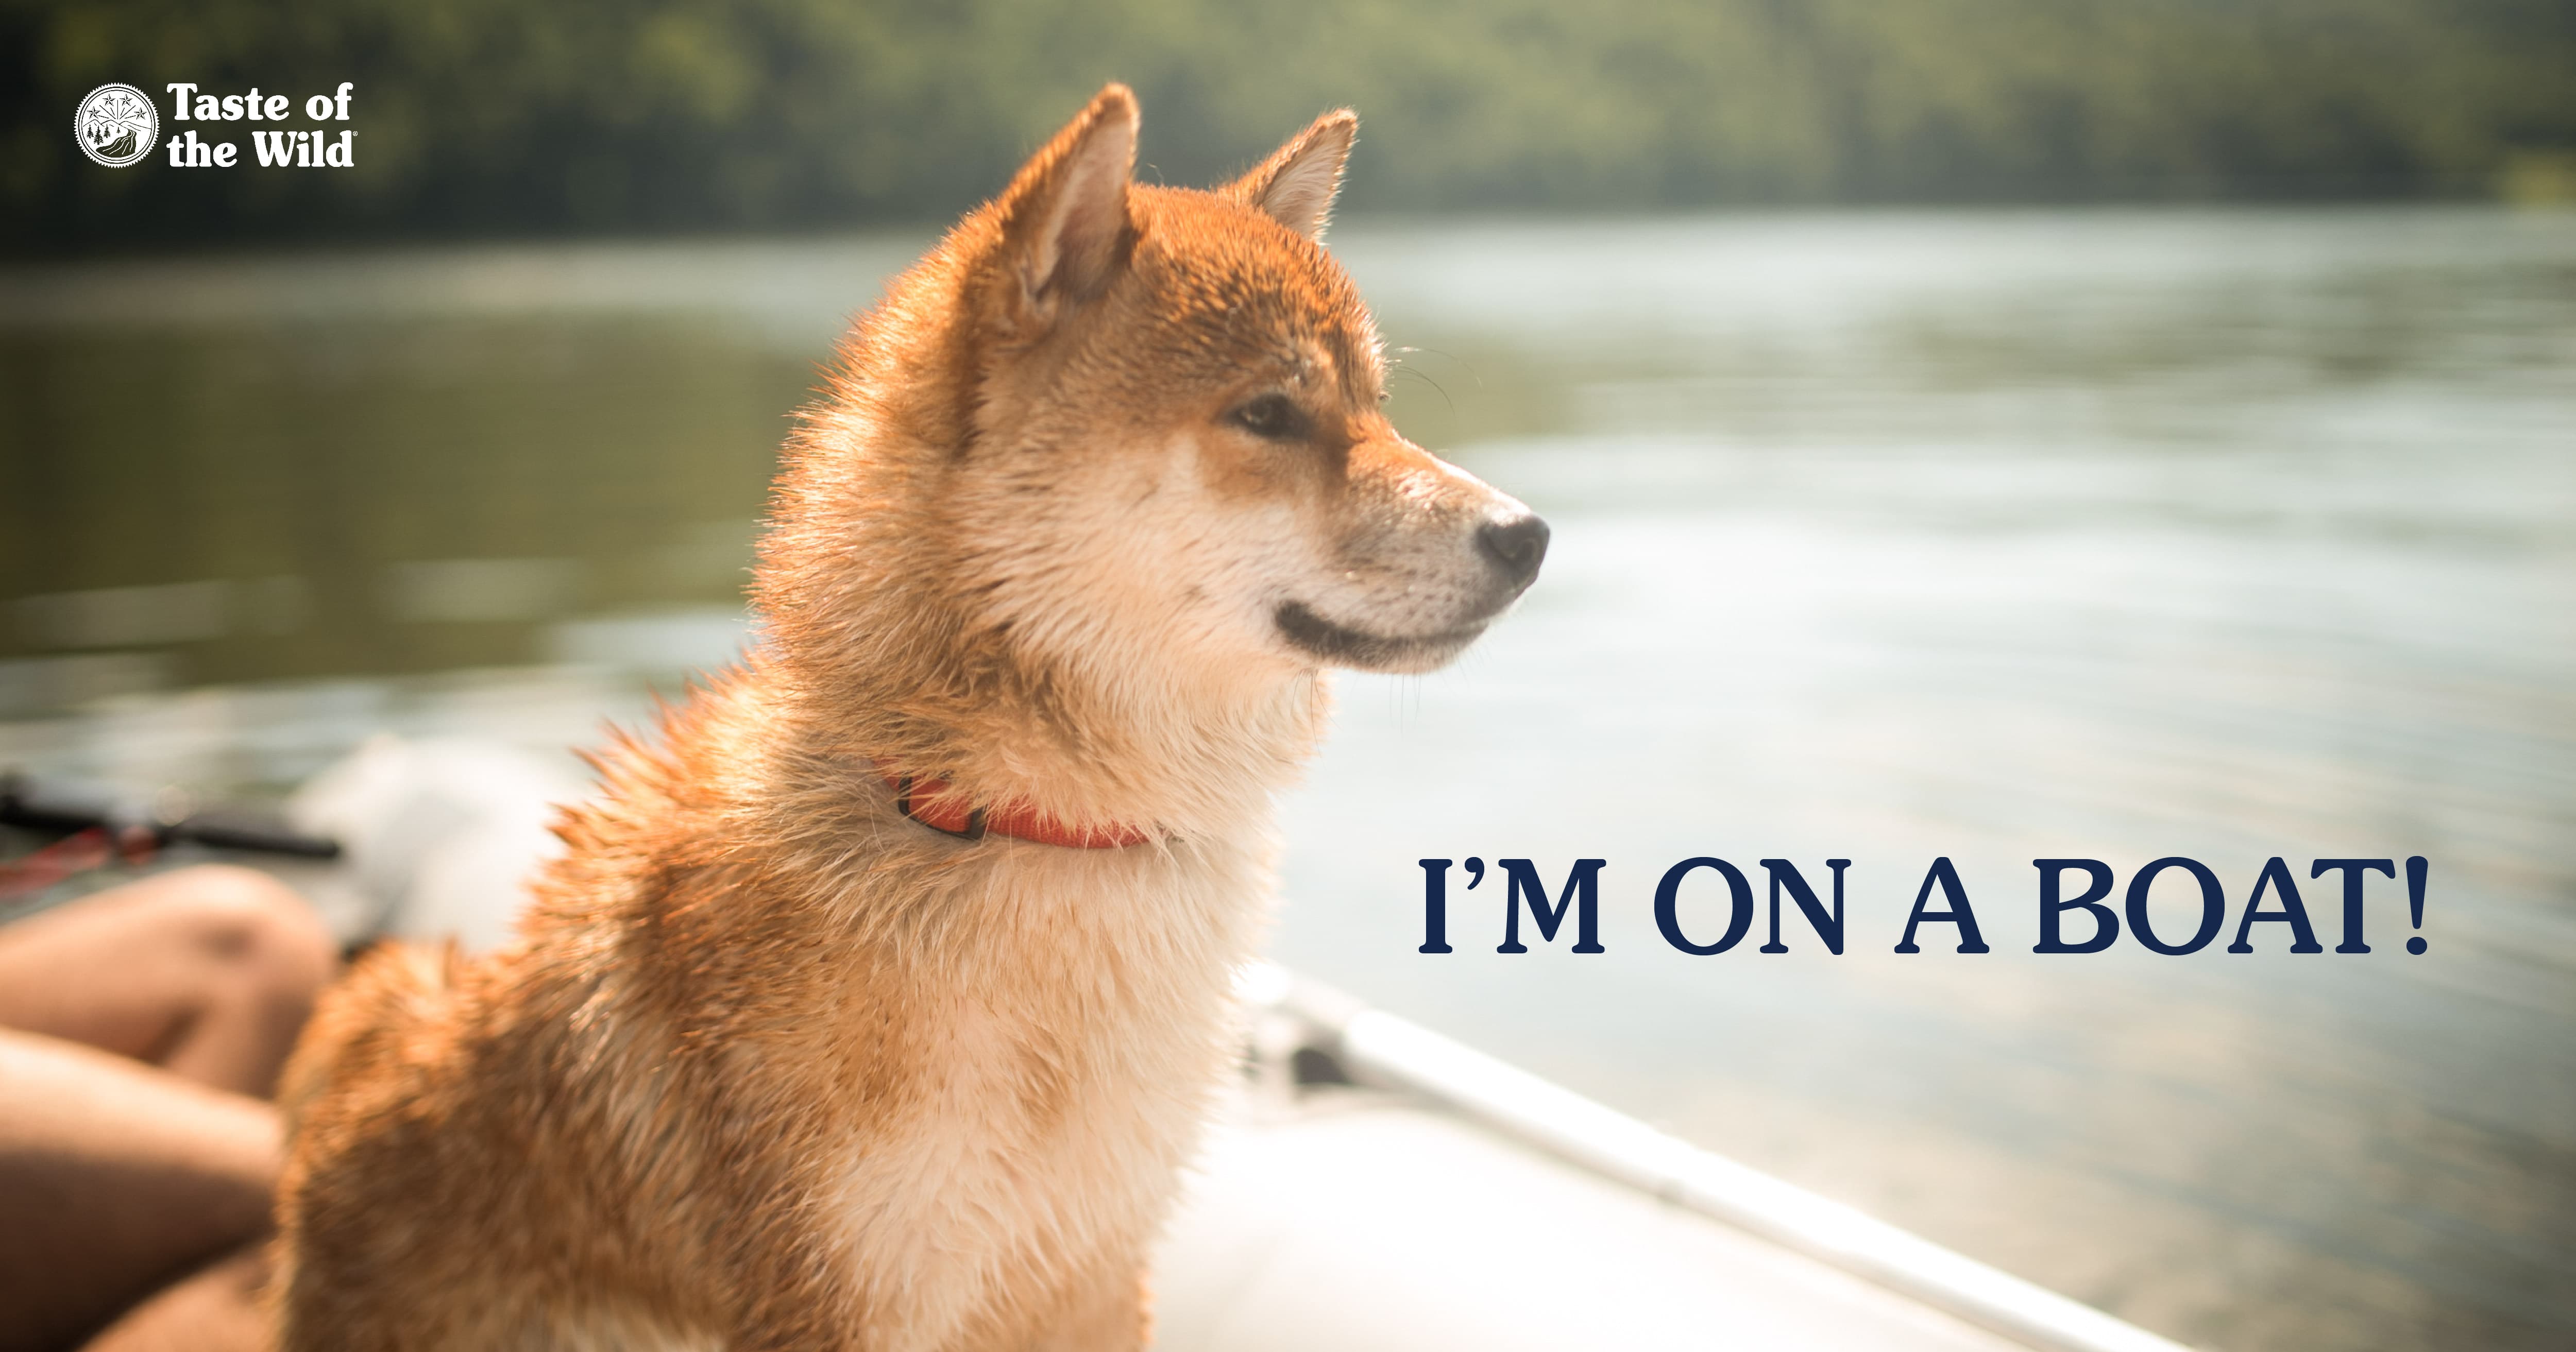 A light brown and white dog sitting on a boat on the water.